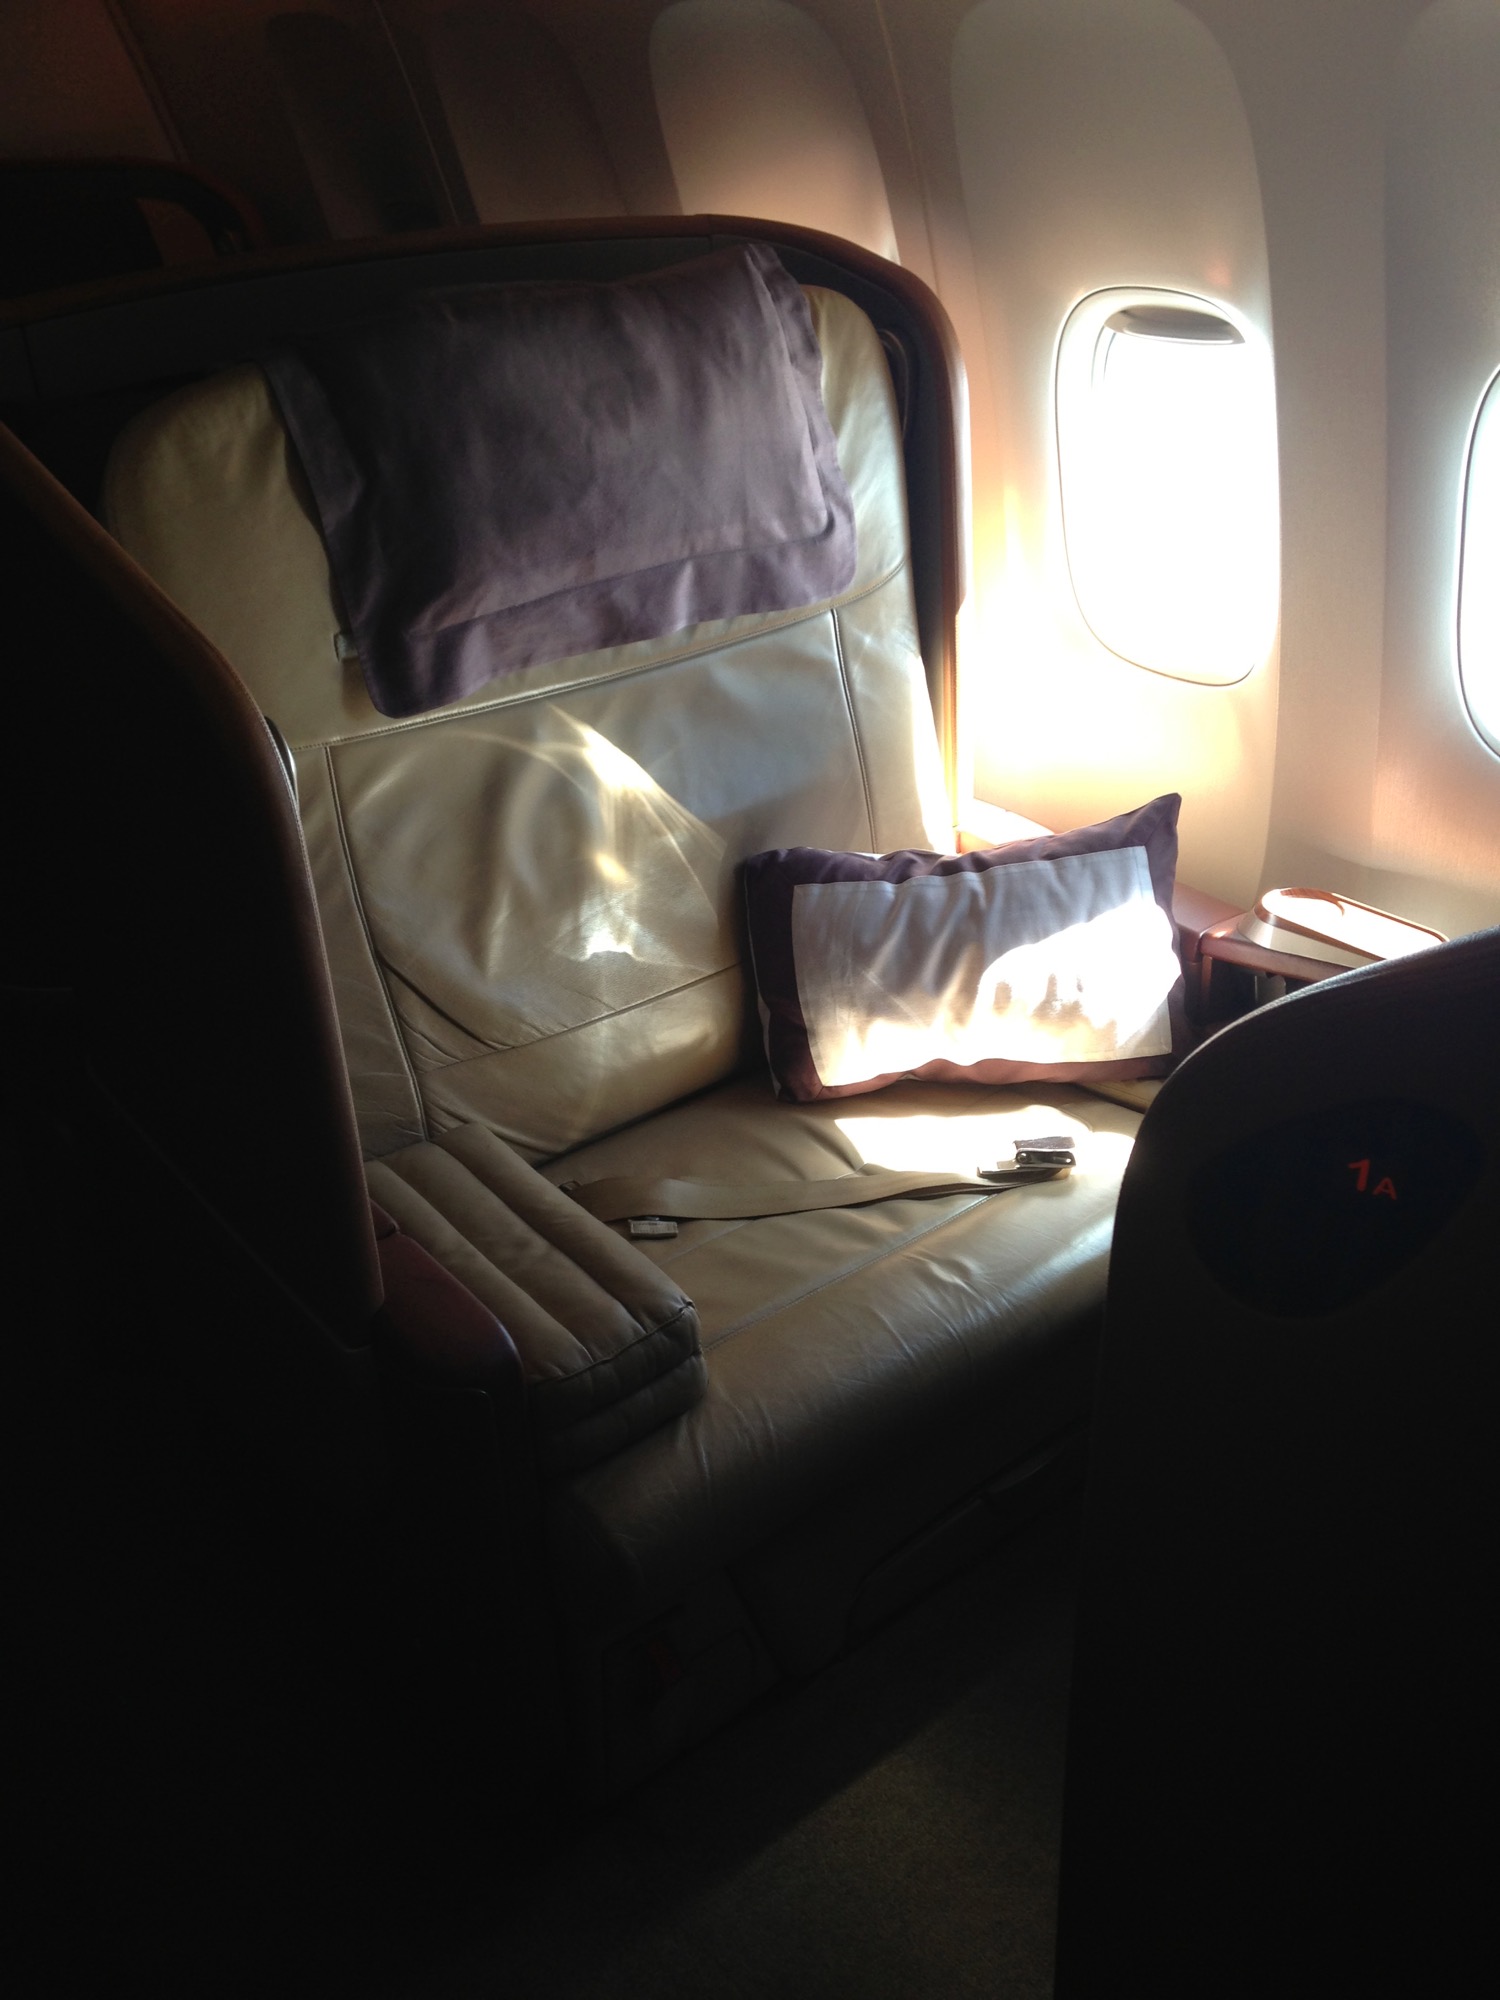 a seat with pillows on it